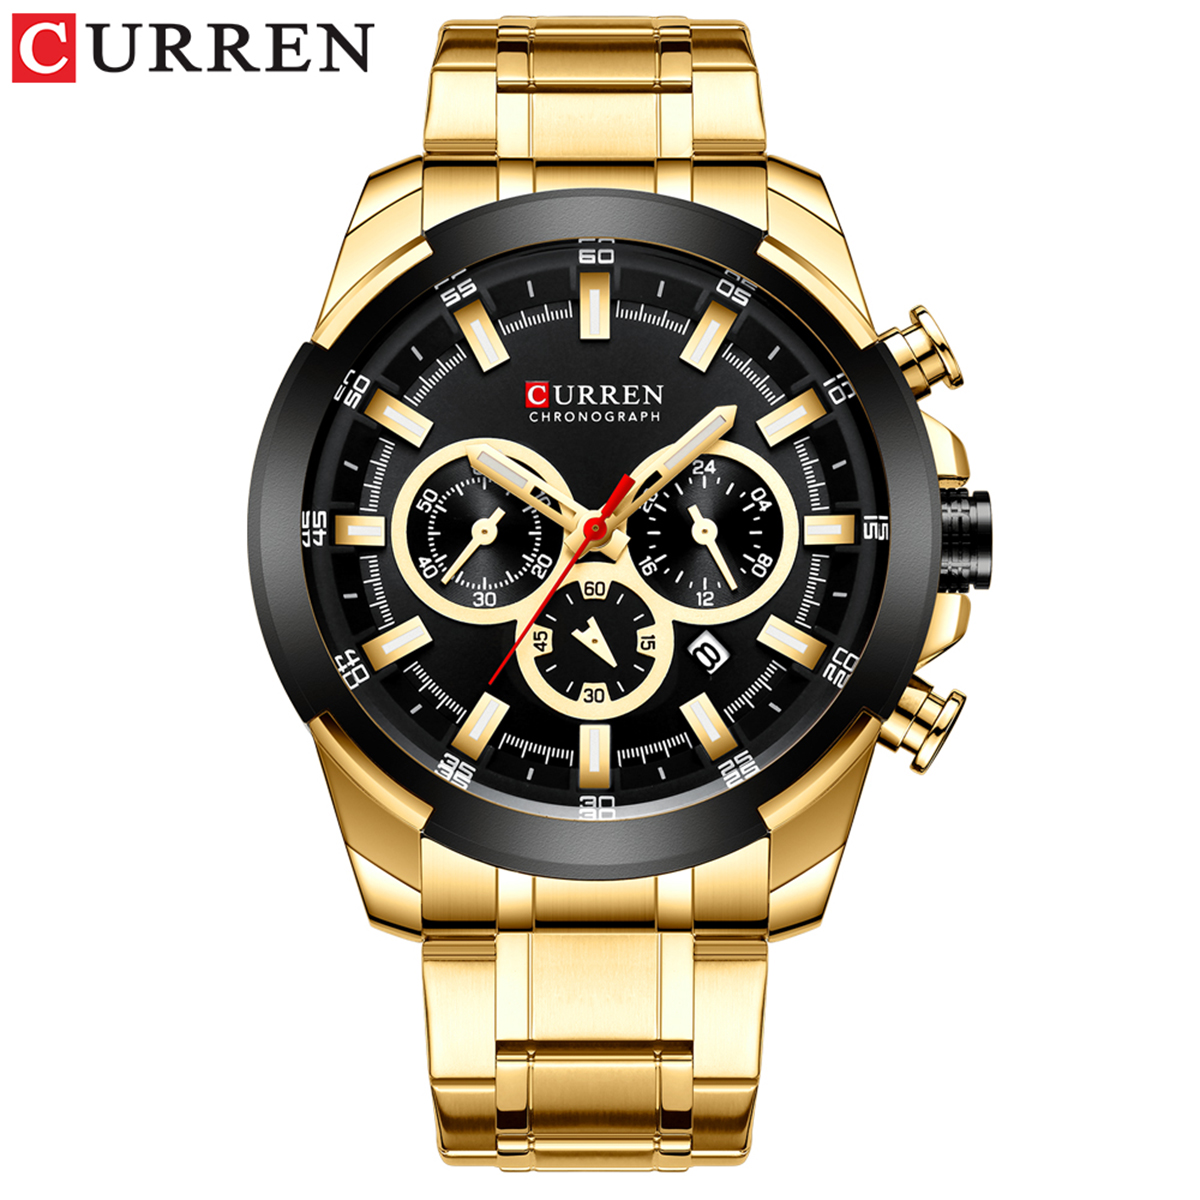 CURREN 8361 Quartz Man Wristwatch Watch for Male Men Watches with Calendar Indicator Date Waterproof Luminous Hands Three Sub-Dials Second Minute Microsecond Chronograph Stainless Steel Stra - image 2 of 7